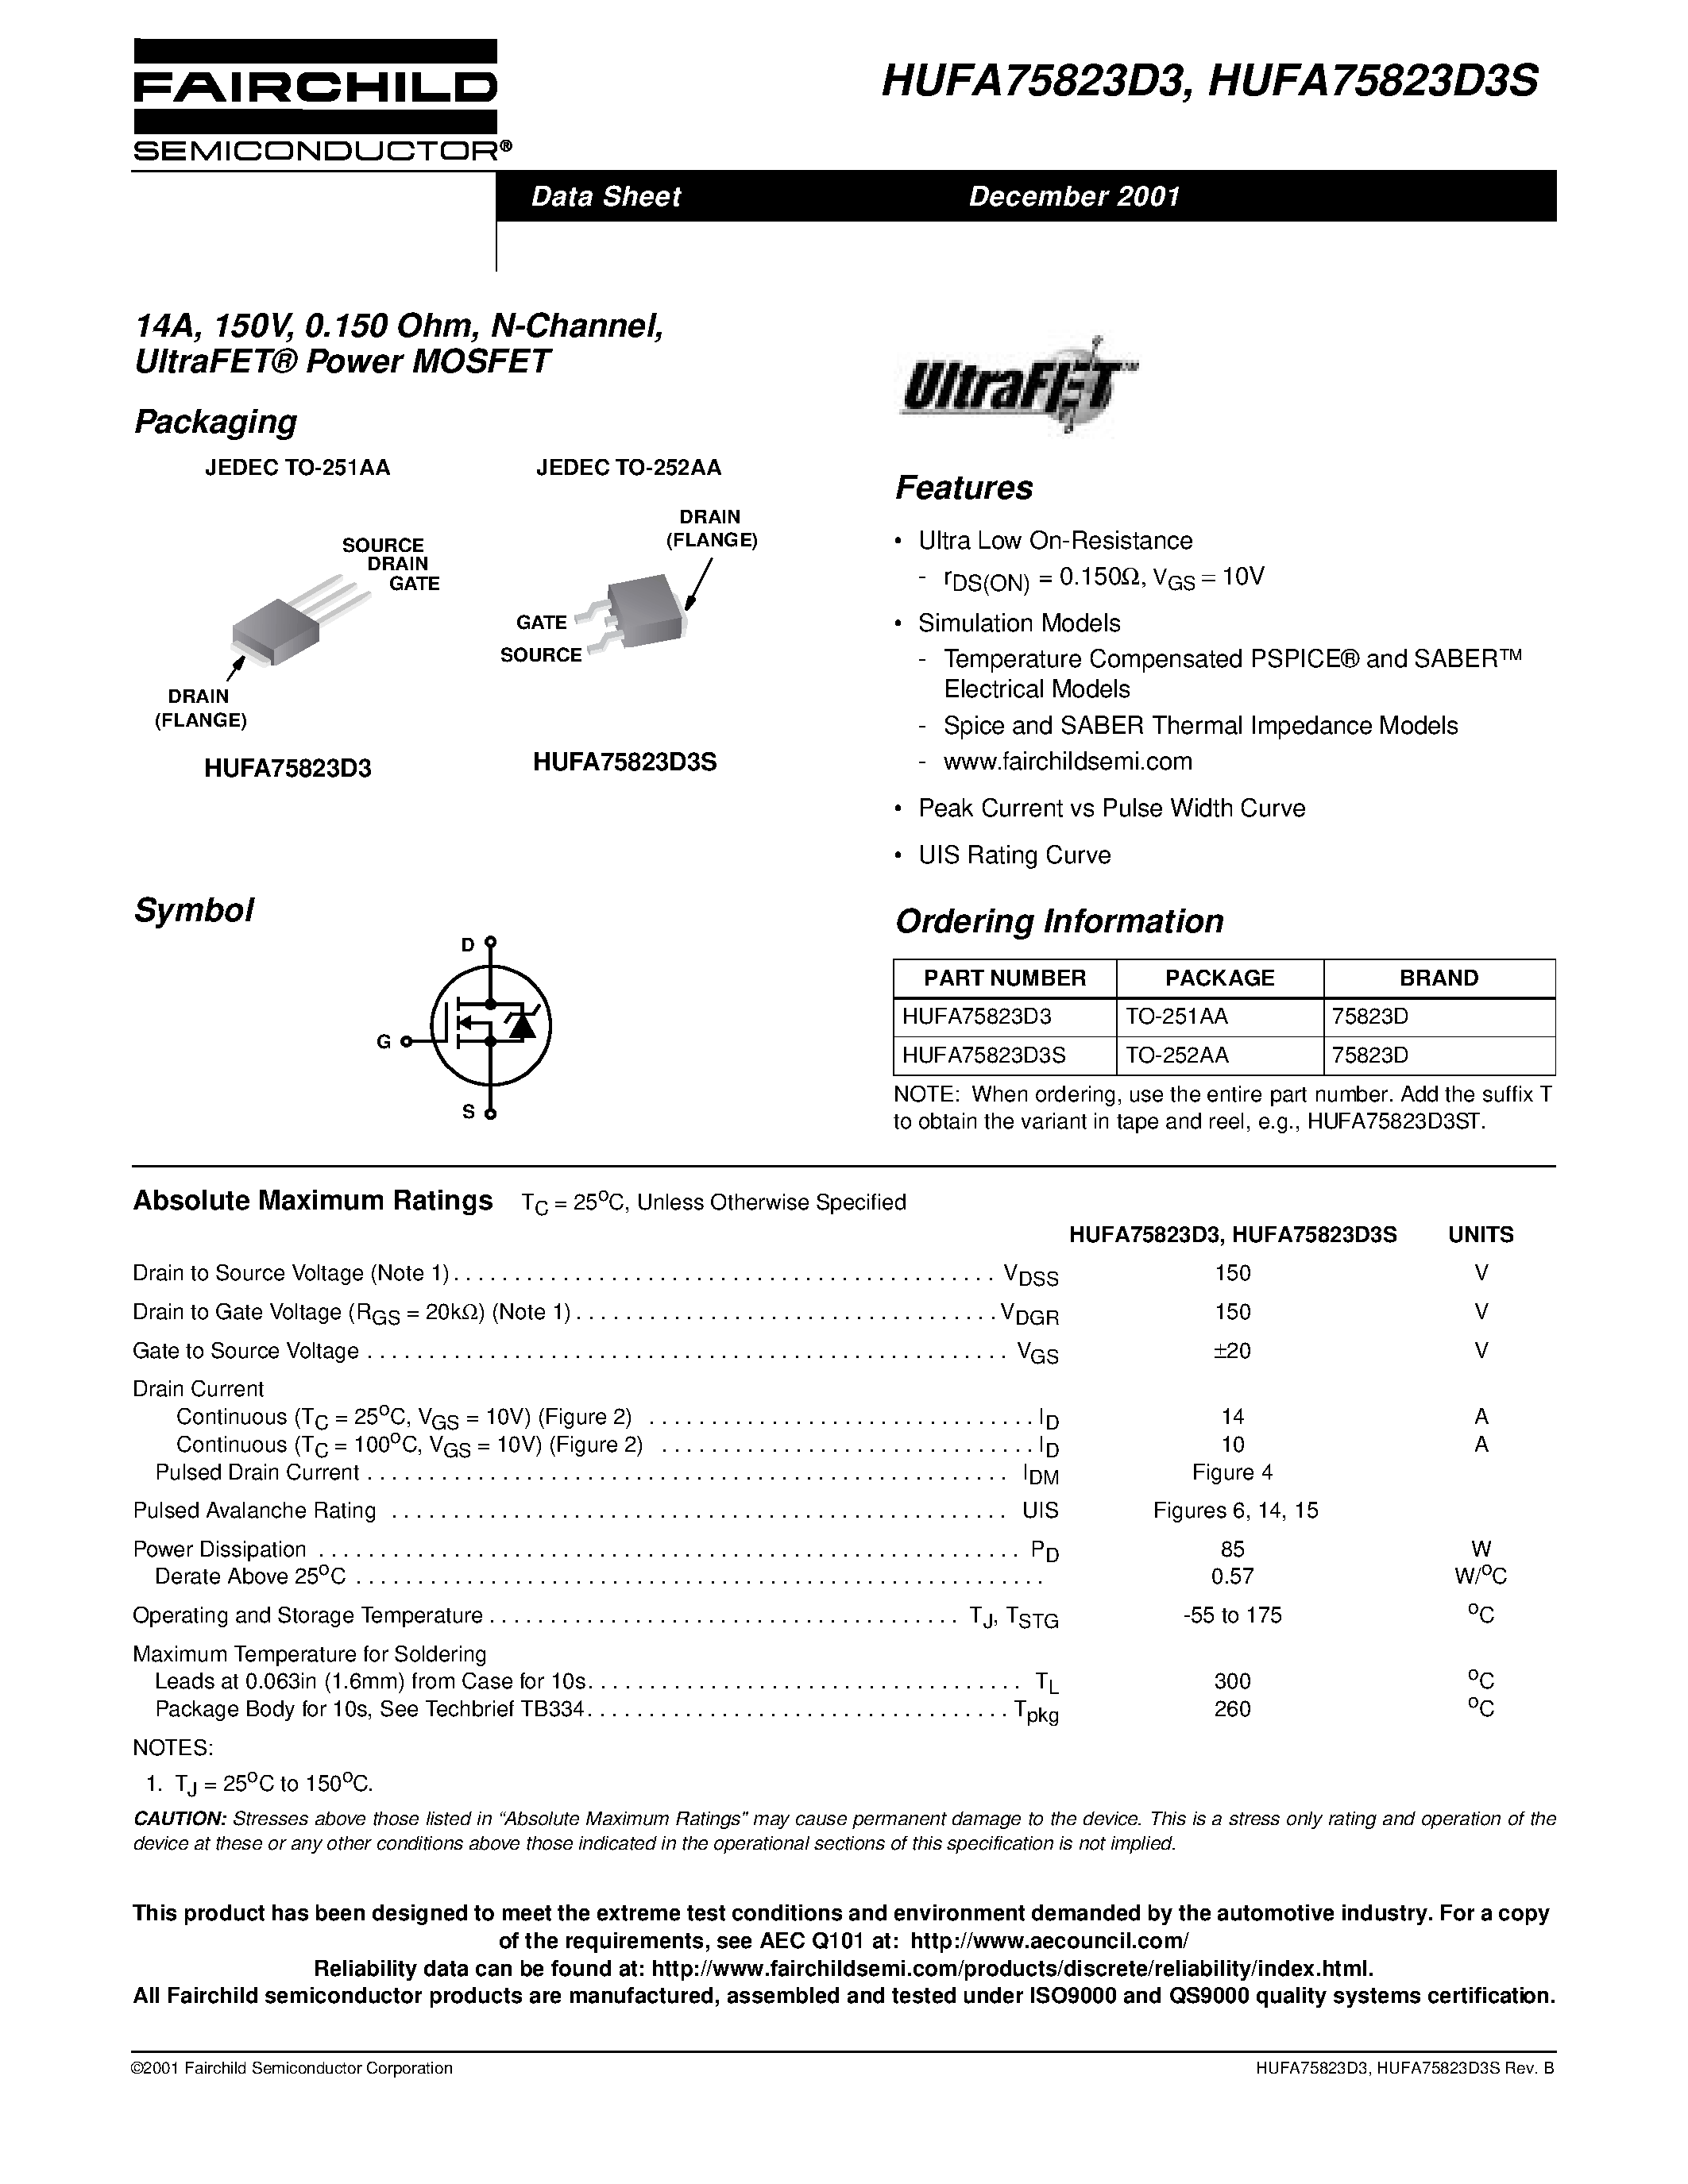 Datasheet HUFA75823D3 - 14A/ 150V/ 0.150 Ohm/ N-Channel/ UltraFET Power MOSFET page 1